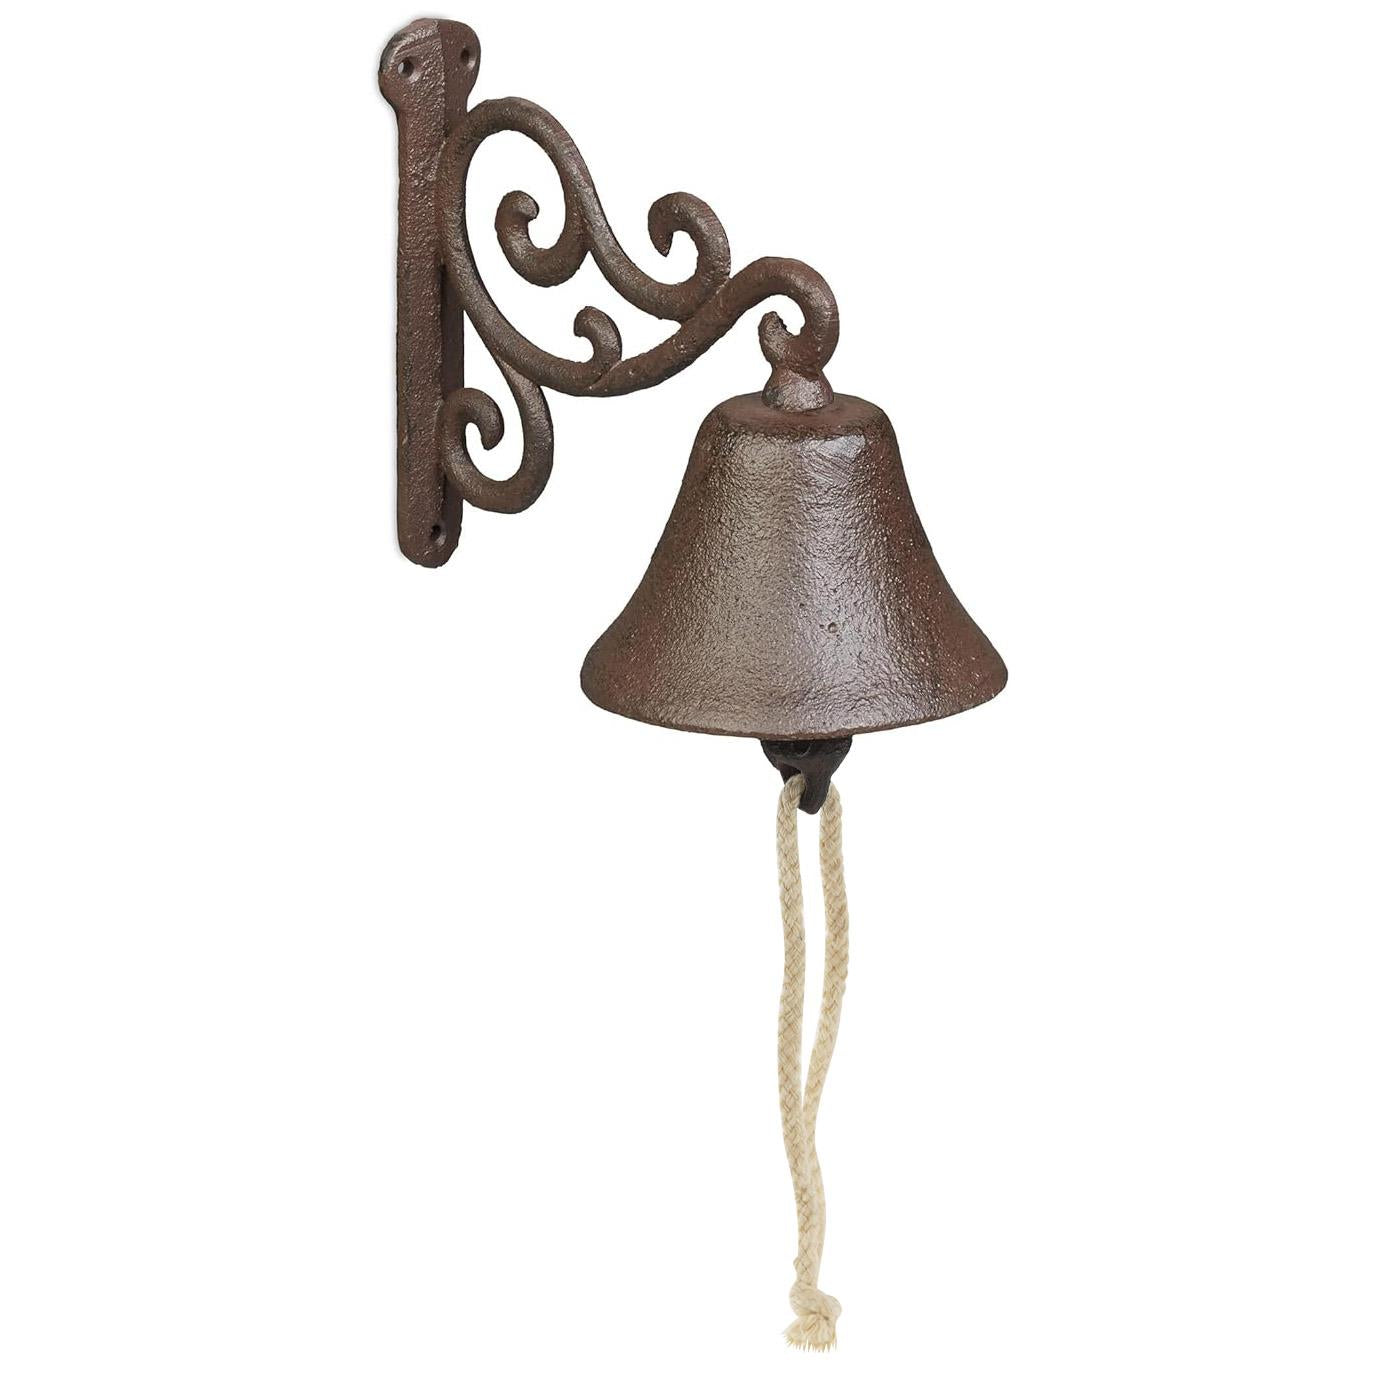 Antique-Look Door Bell Entryway Decoration by GEEZY - The Magic Toy Shop